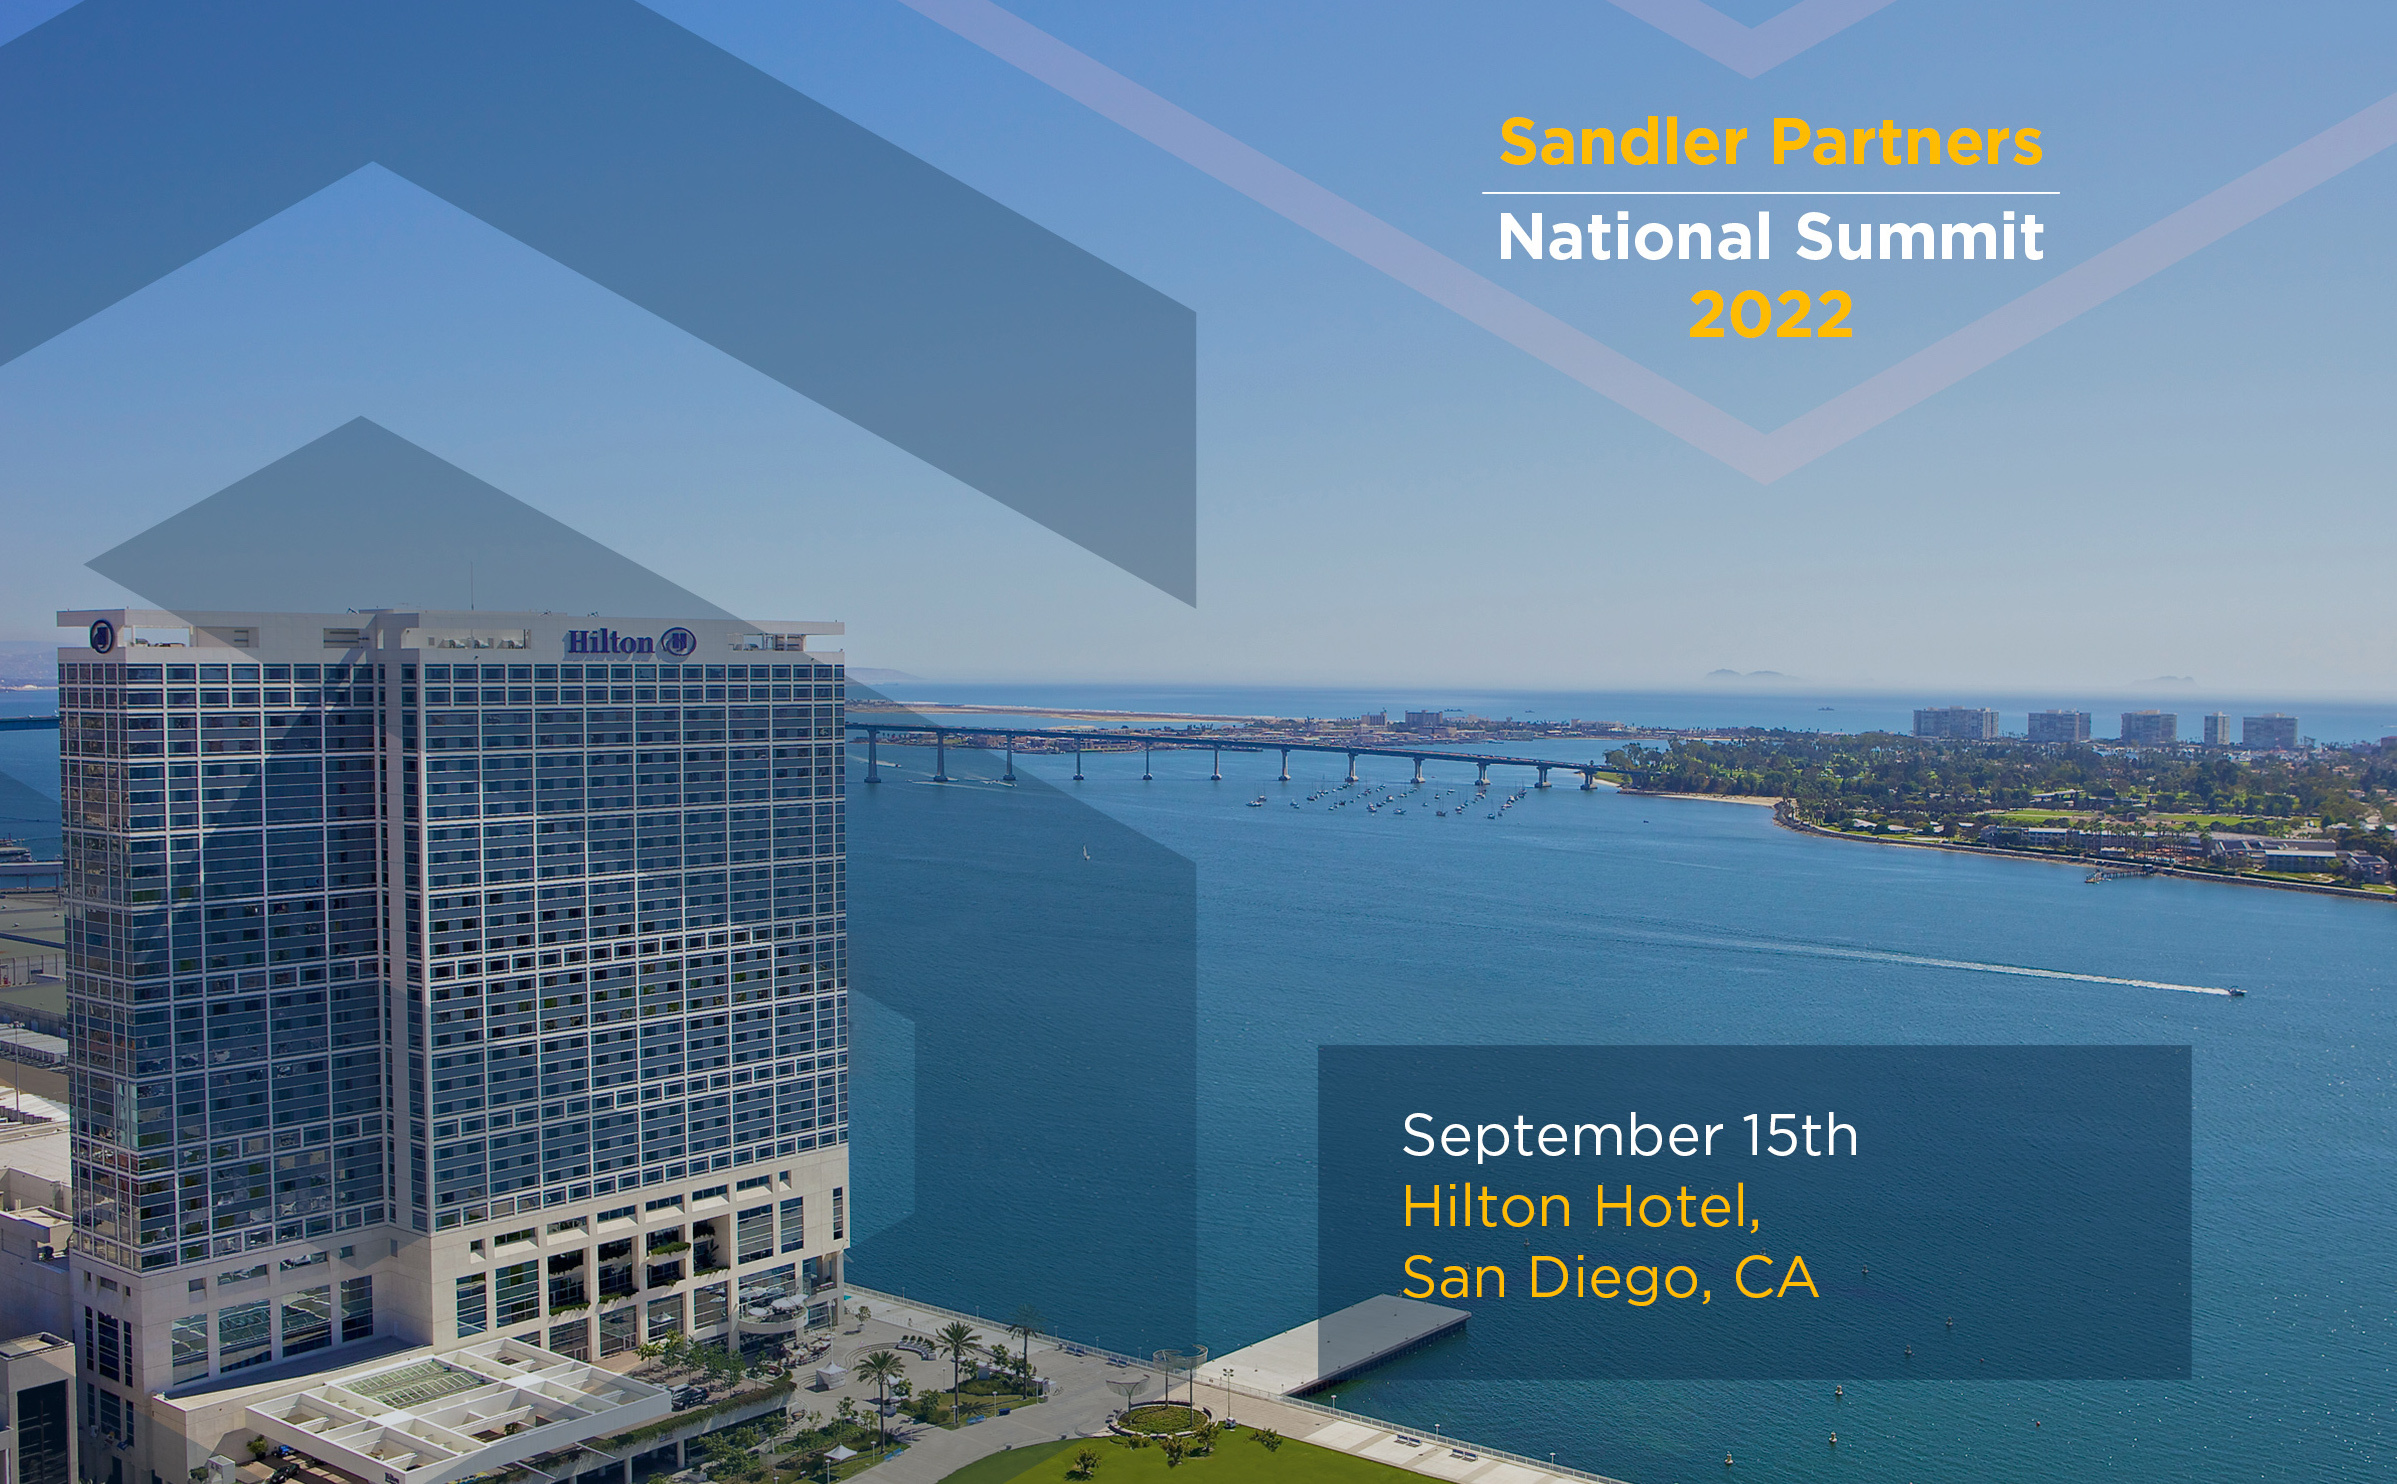 Sandler Partners announces date and location of 2022 National Summit